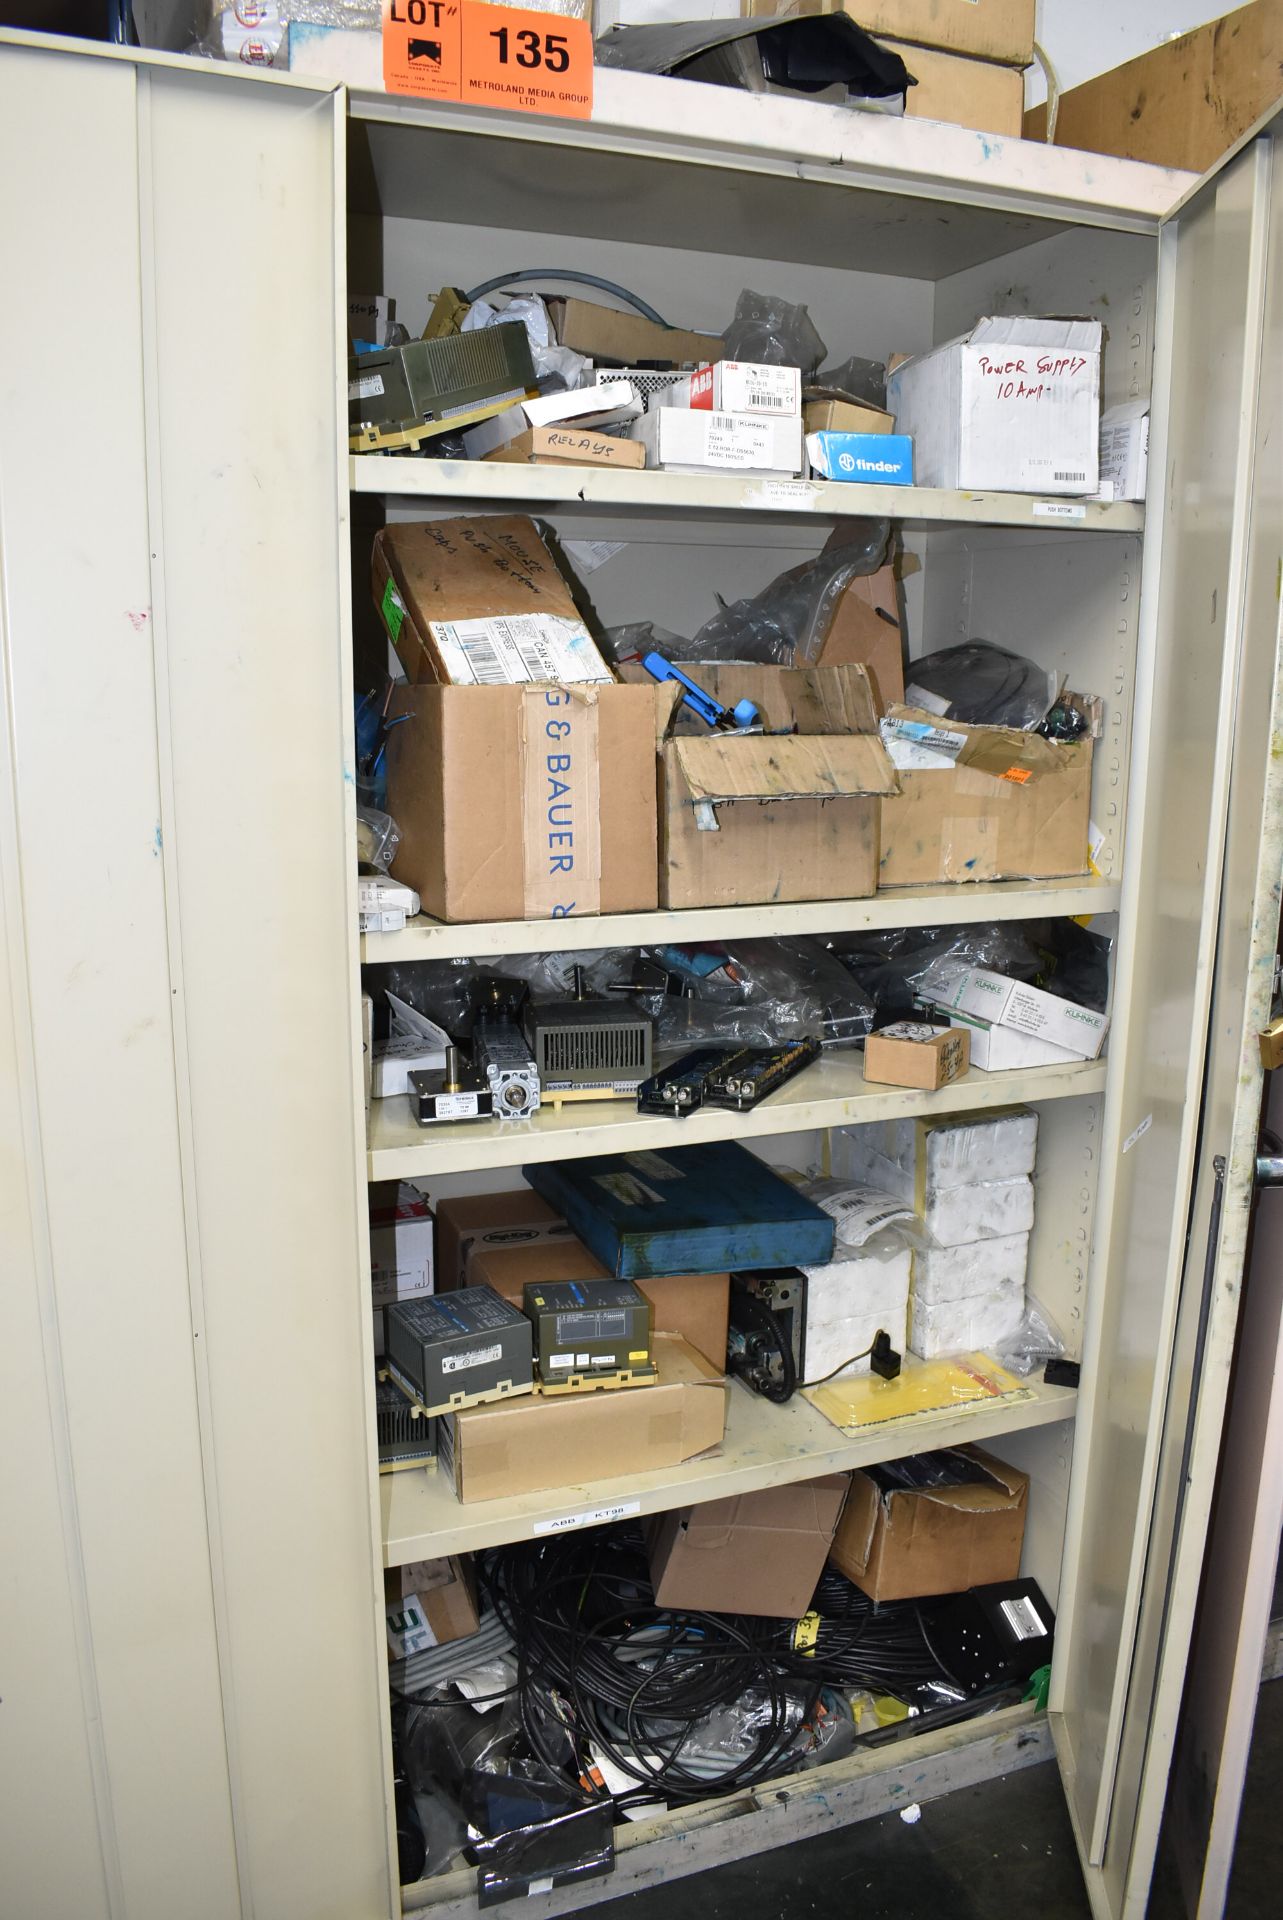 LOT/ HIGHBOY CABINET WITH CONTENTS - INCLUDING RELAYS, POWER SUPPLIES, ELECTRICAL COMPONENTS,